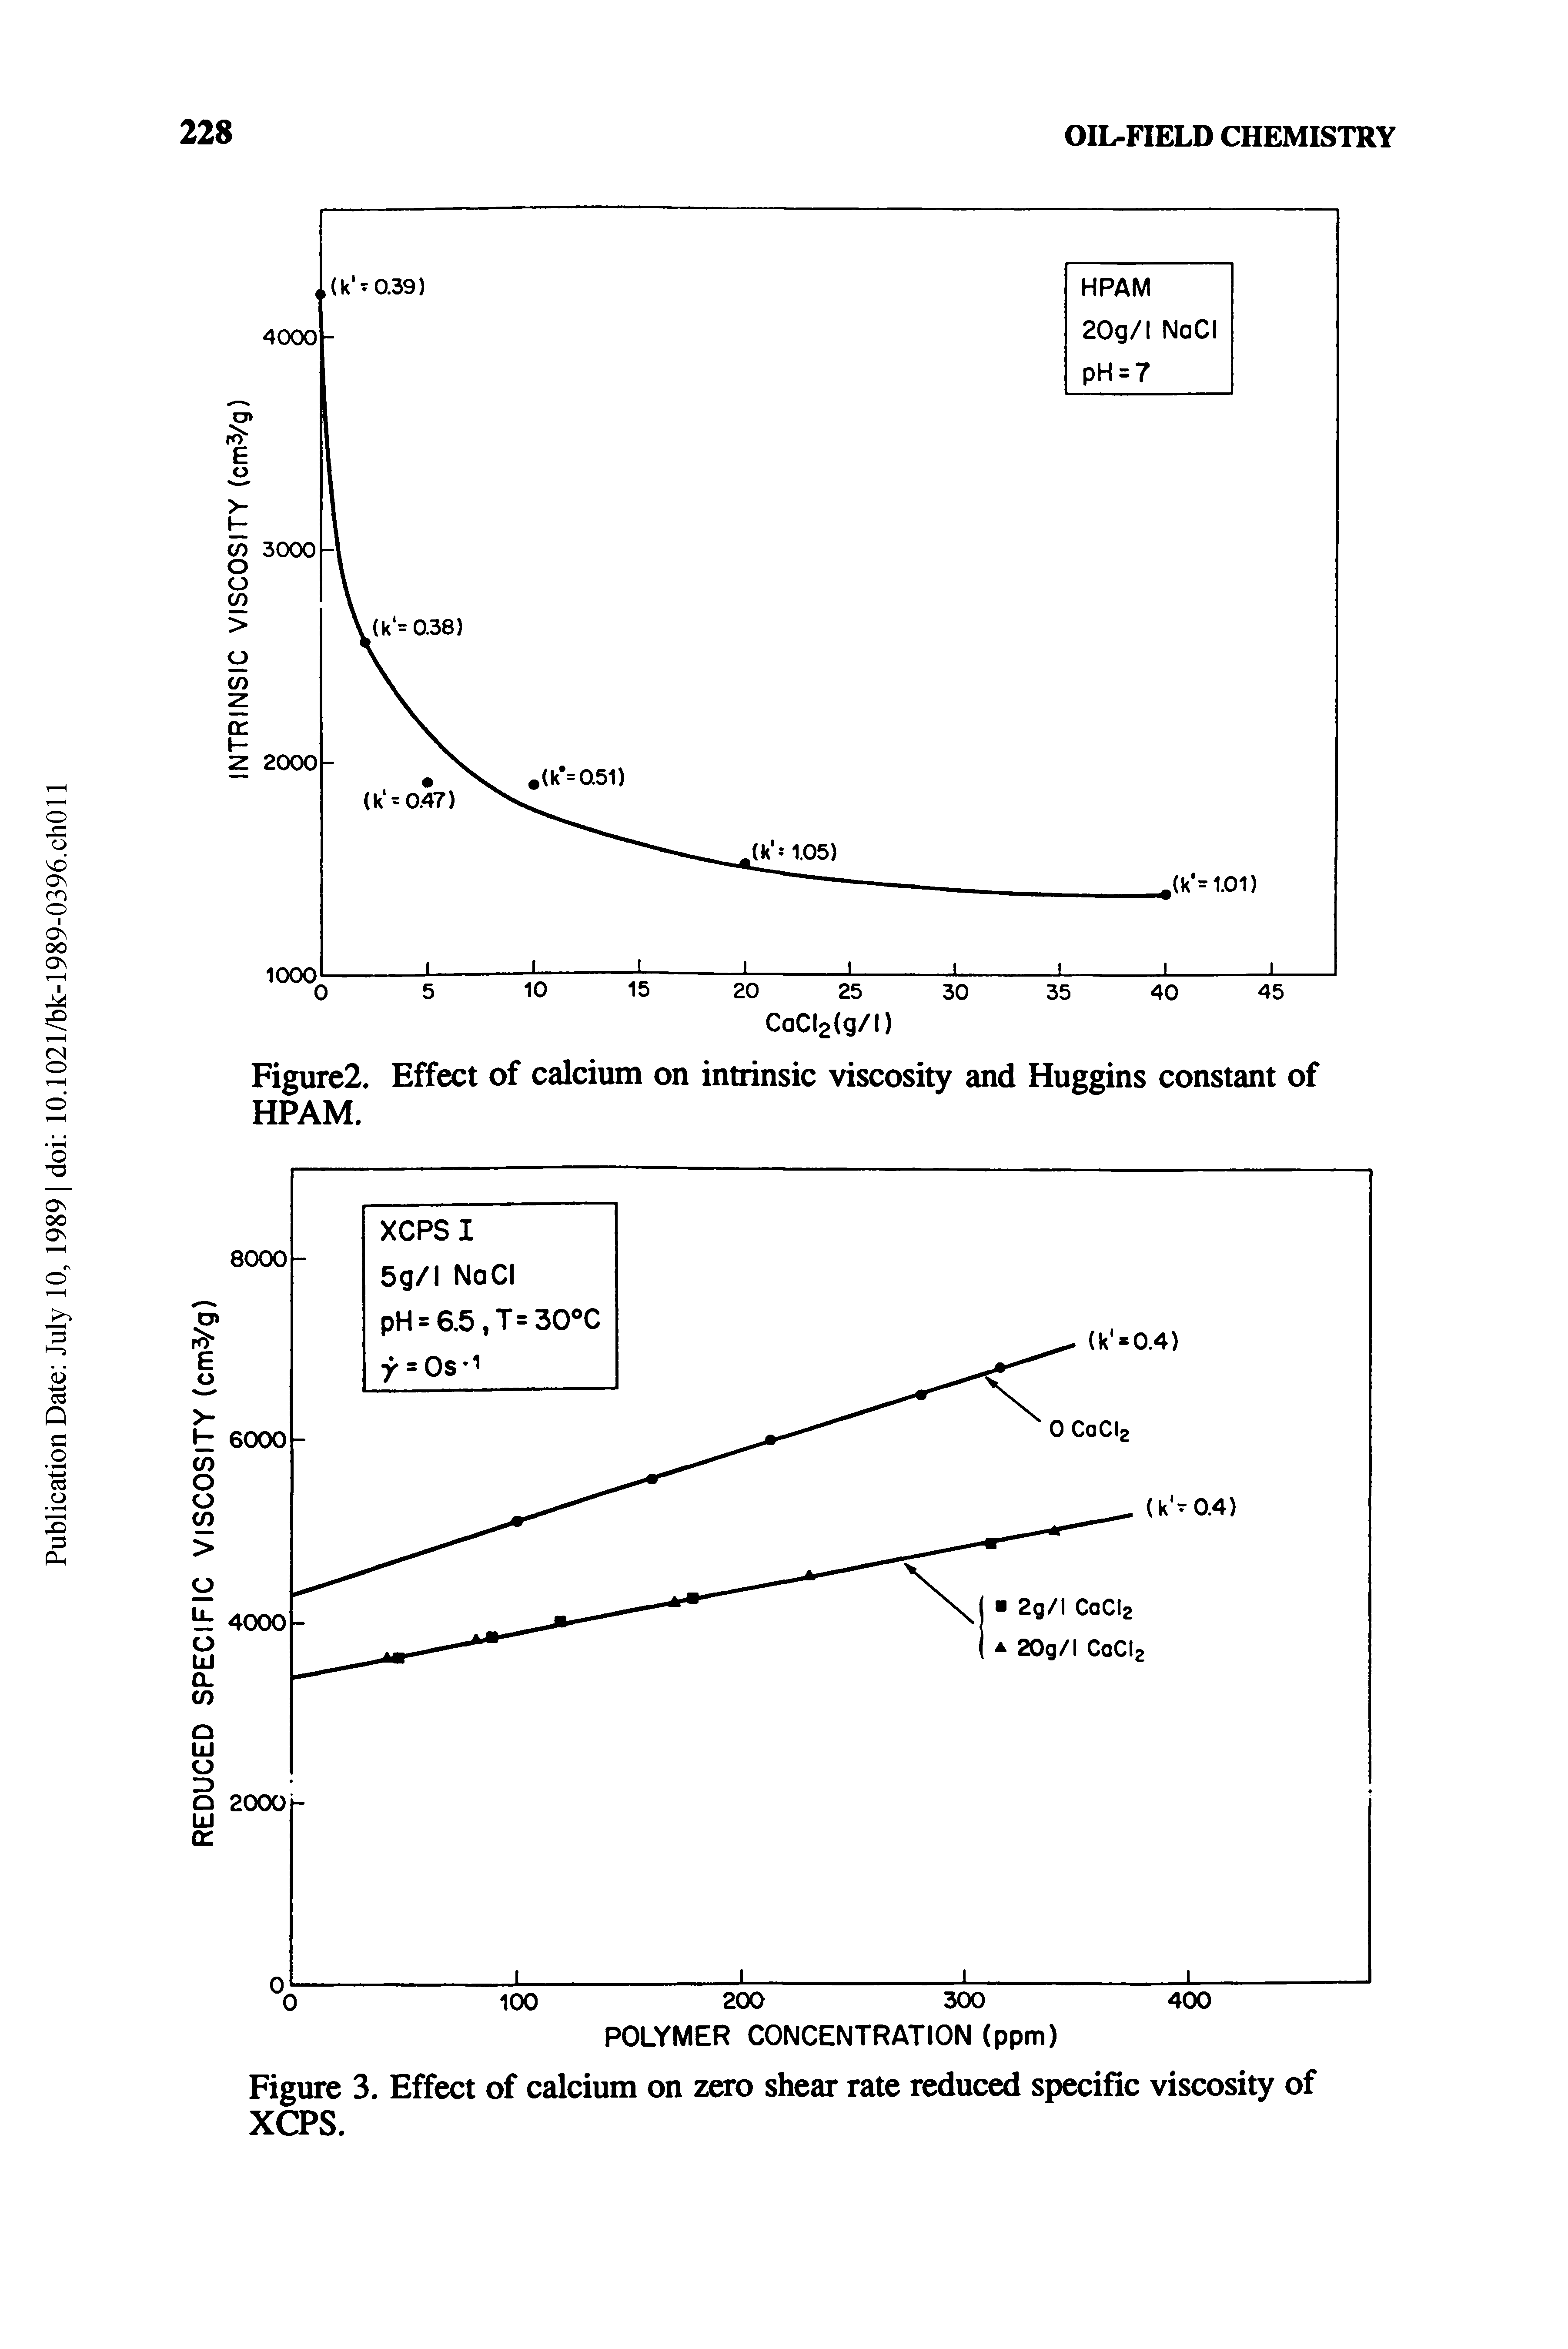 Figure2. Effect of calcium on intrinsic viscosity and Huggins constant of HPAM.